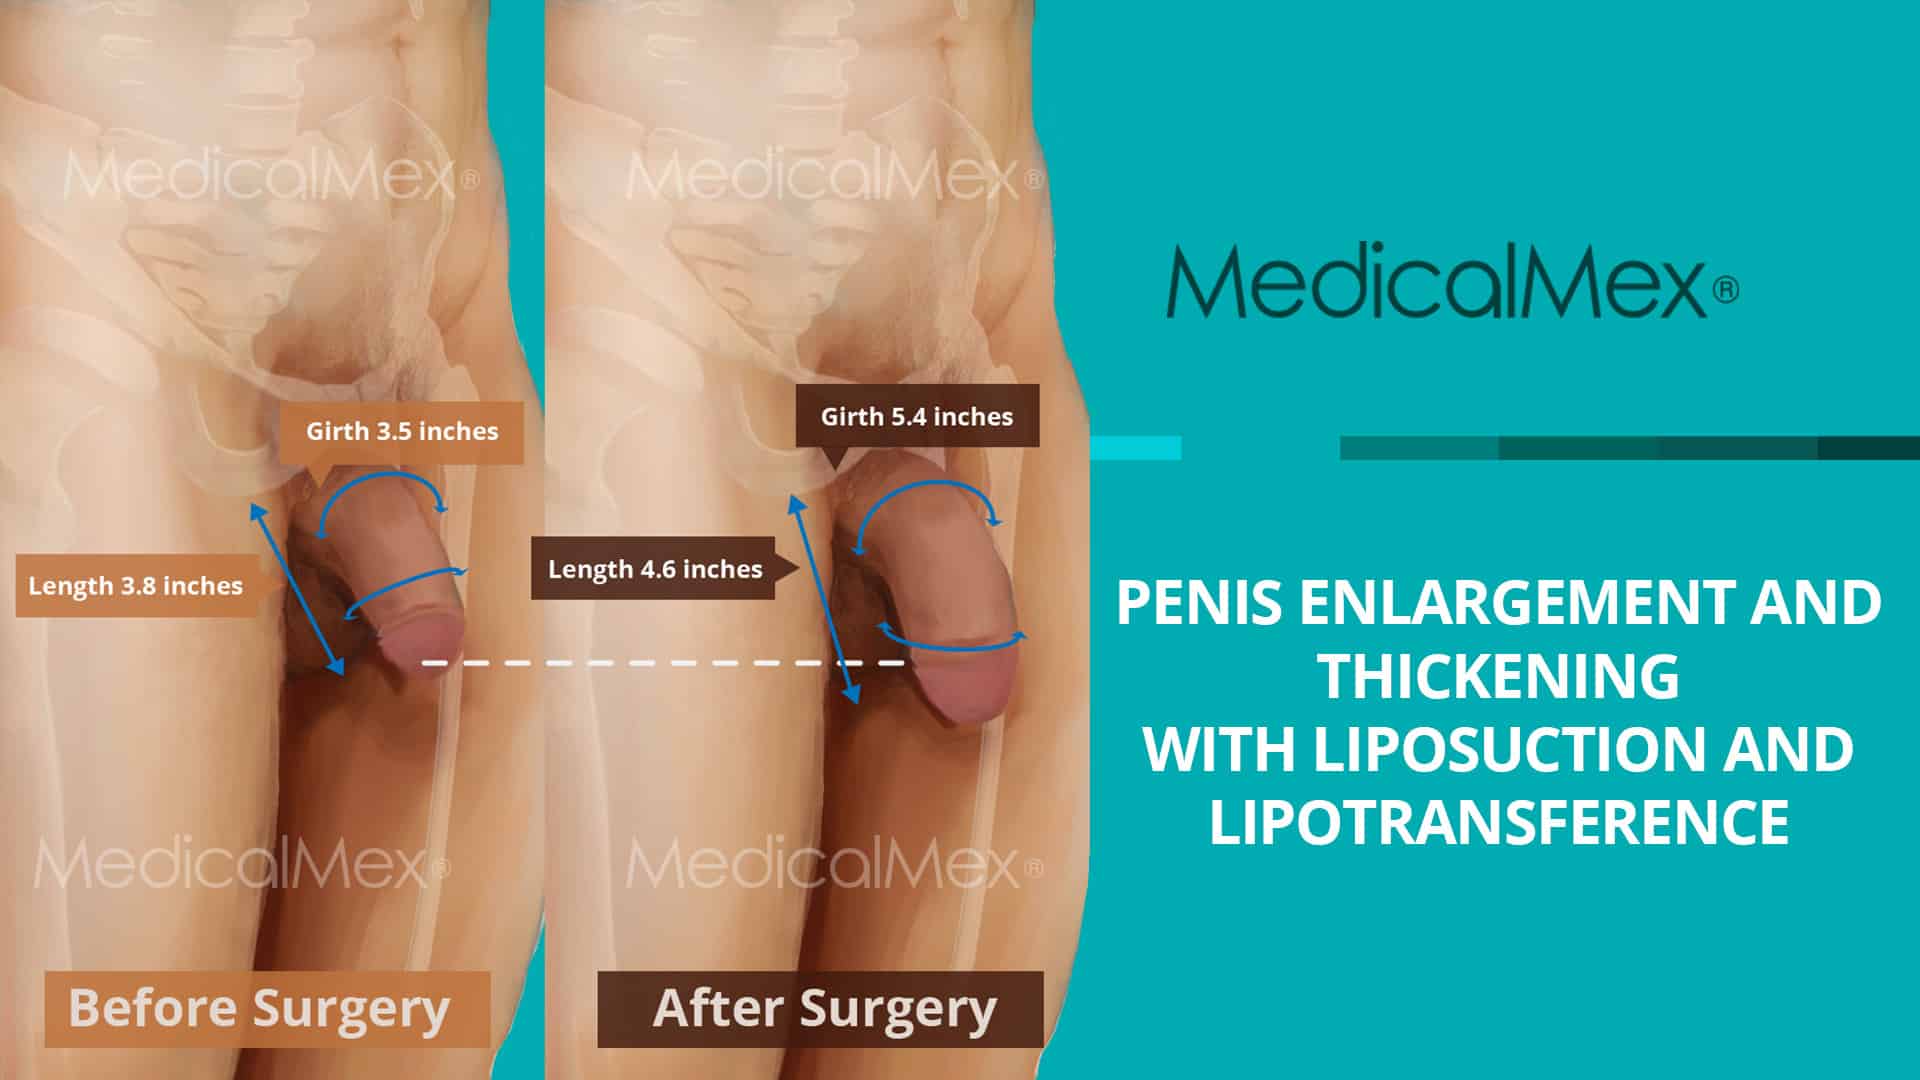 Penis enlargement and thickening with liposuction and lipotransference